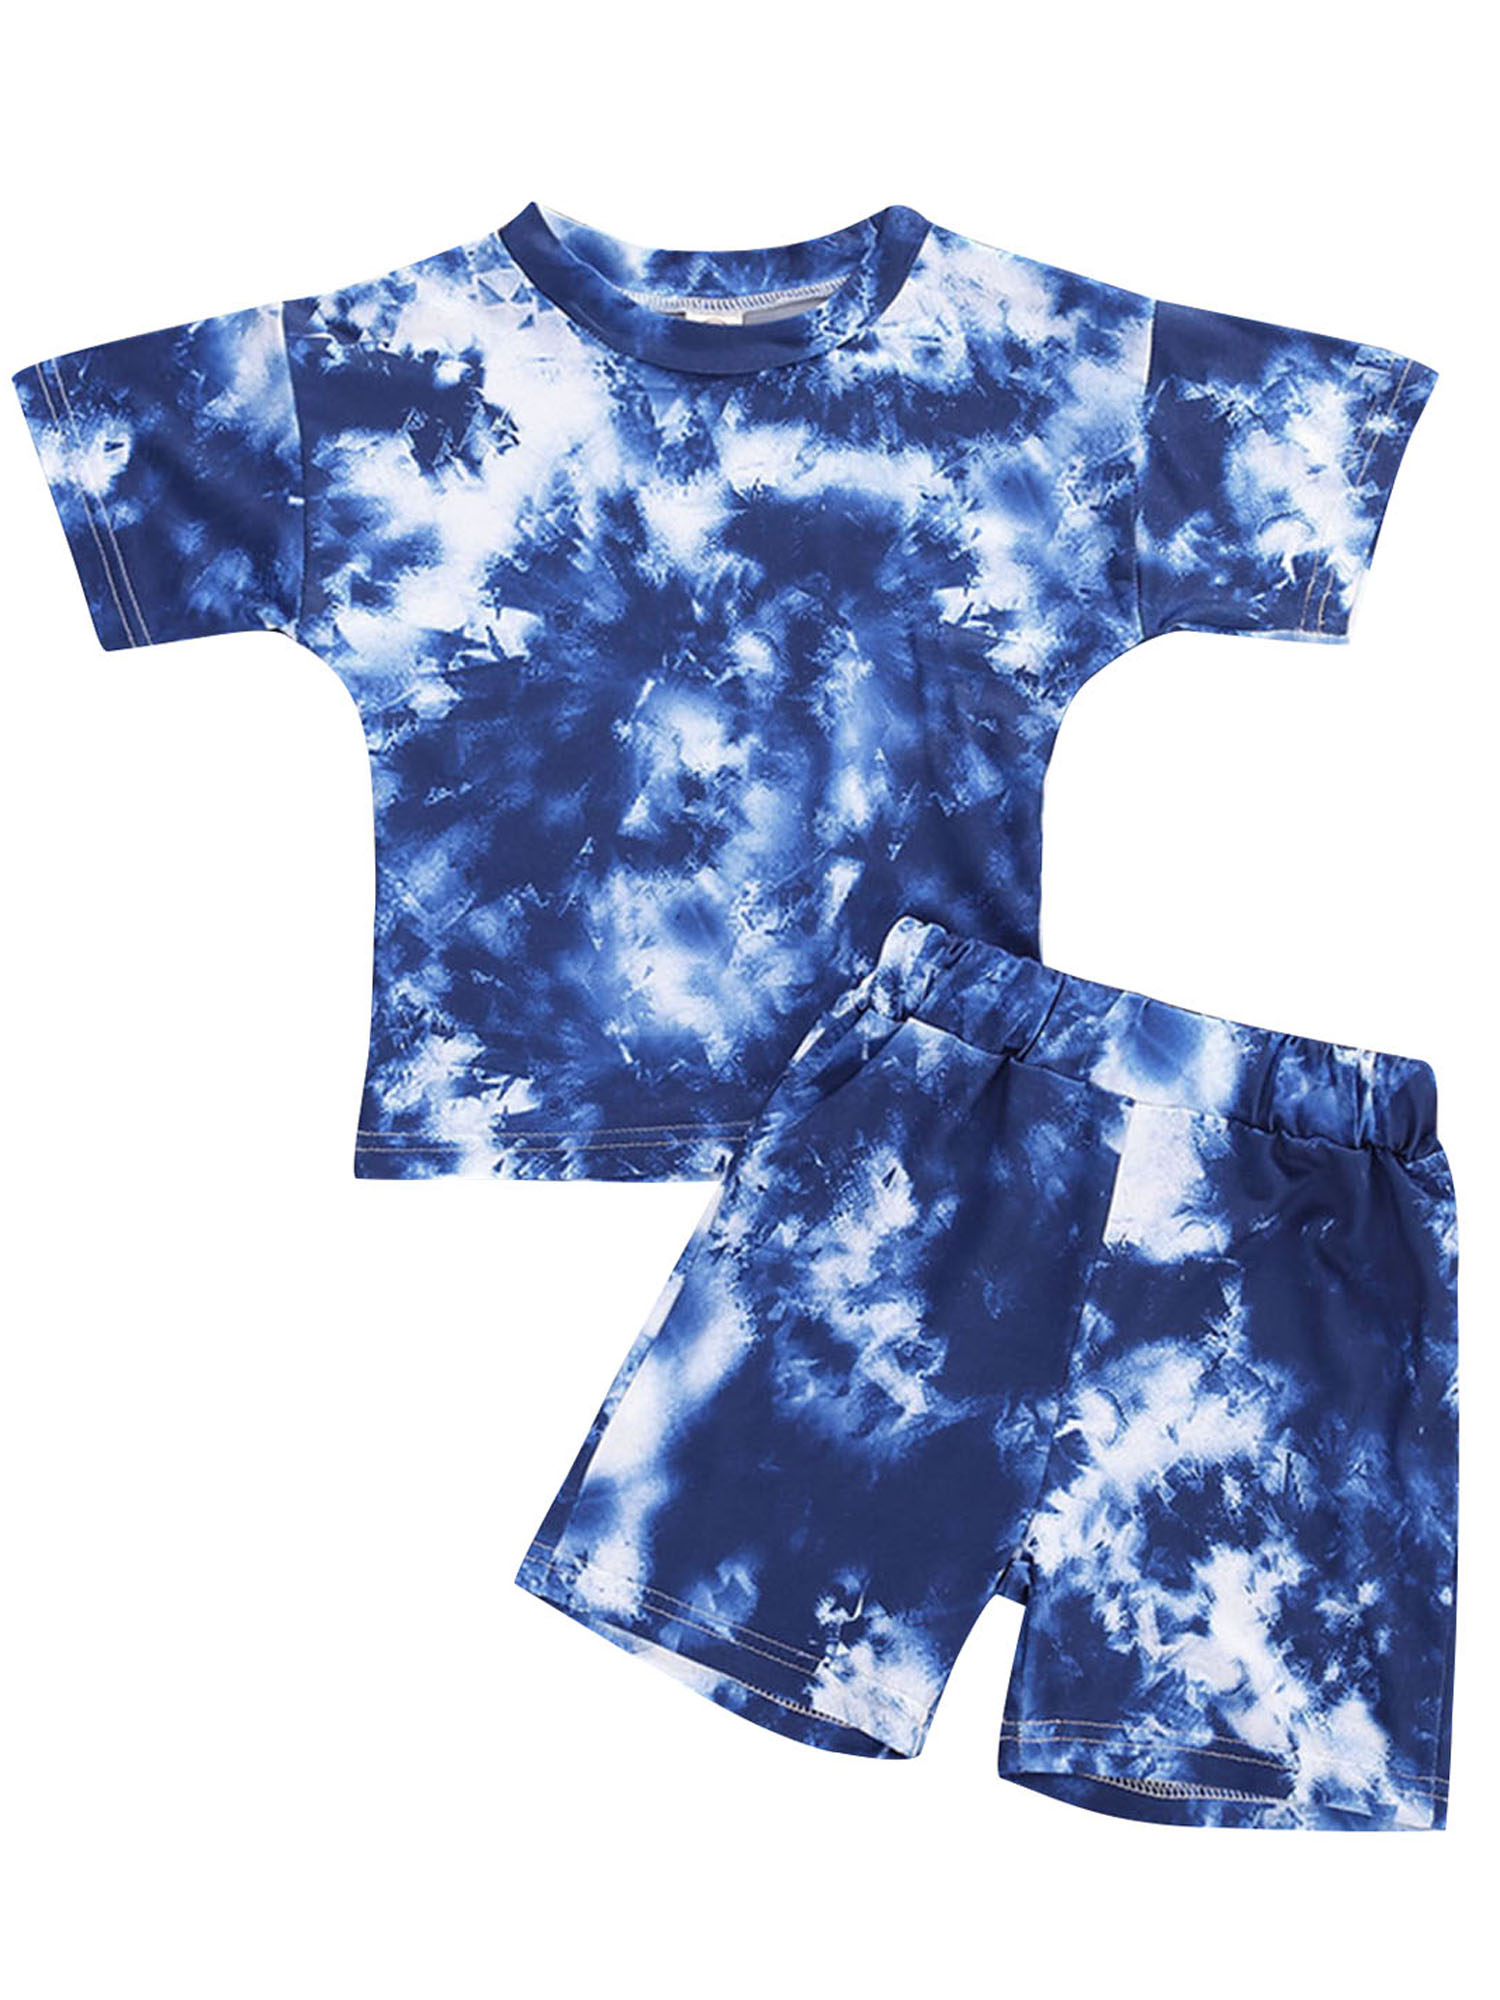 Baby Toddler Boy Girl Tie Dye Outfits Short Sleeve T-Shirt Top+Short Pants 2Pcs Unisex Summer Clothes